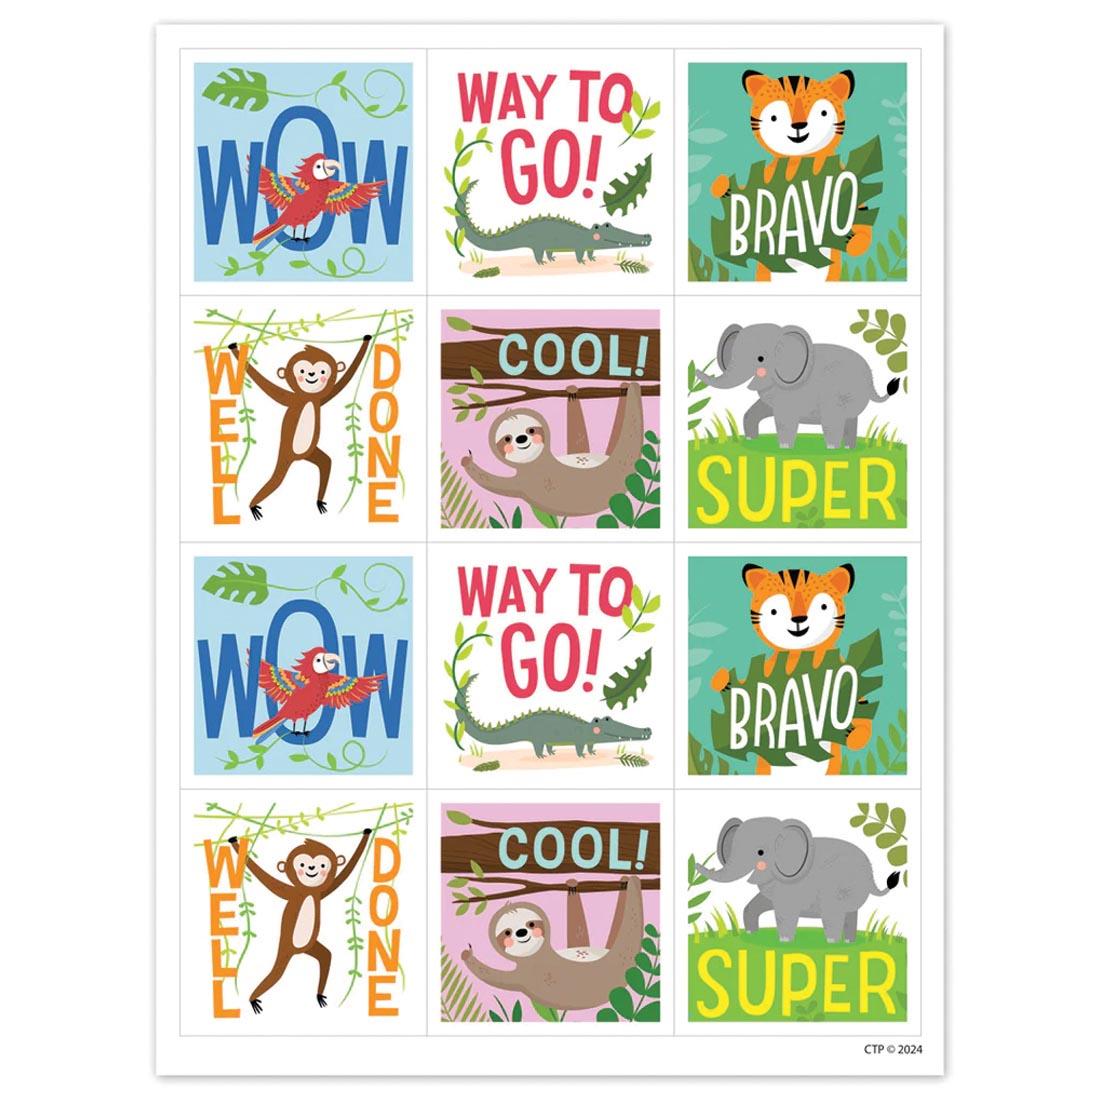 Reward Stickers from the Jungle Friends collection by Creative Teaching Press